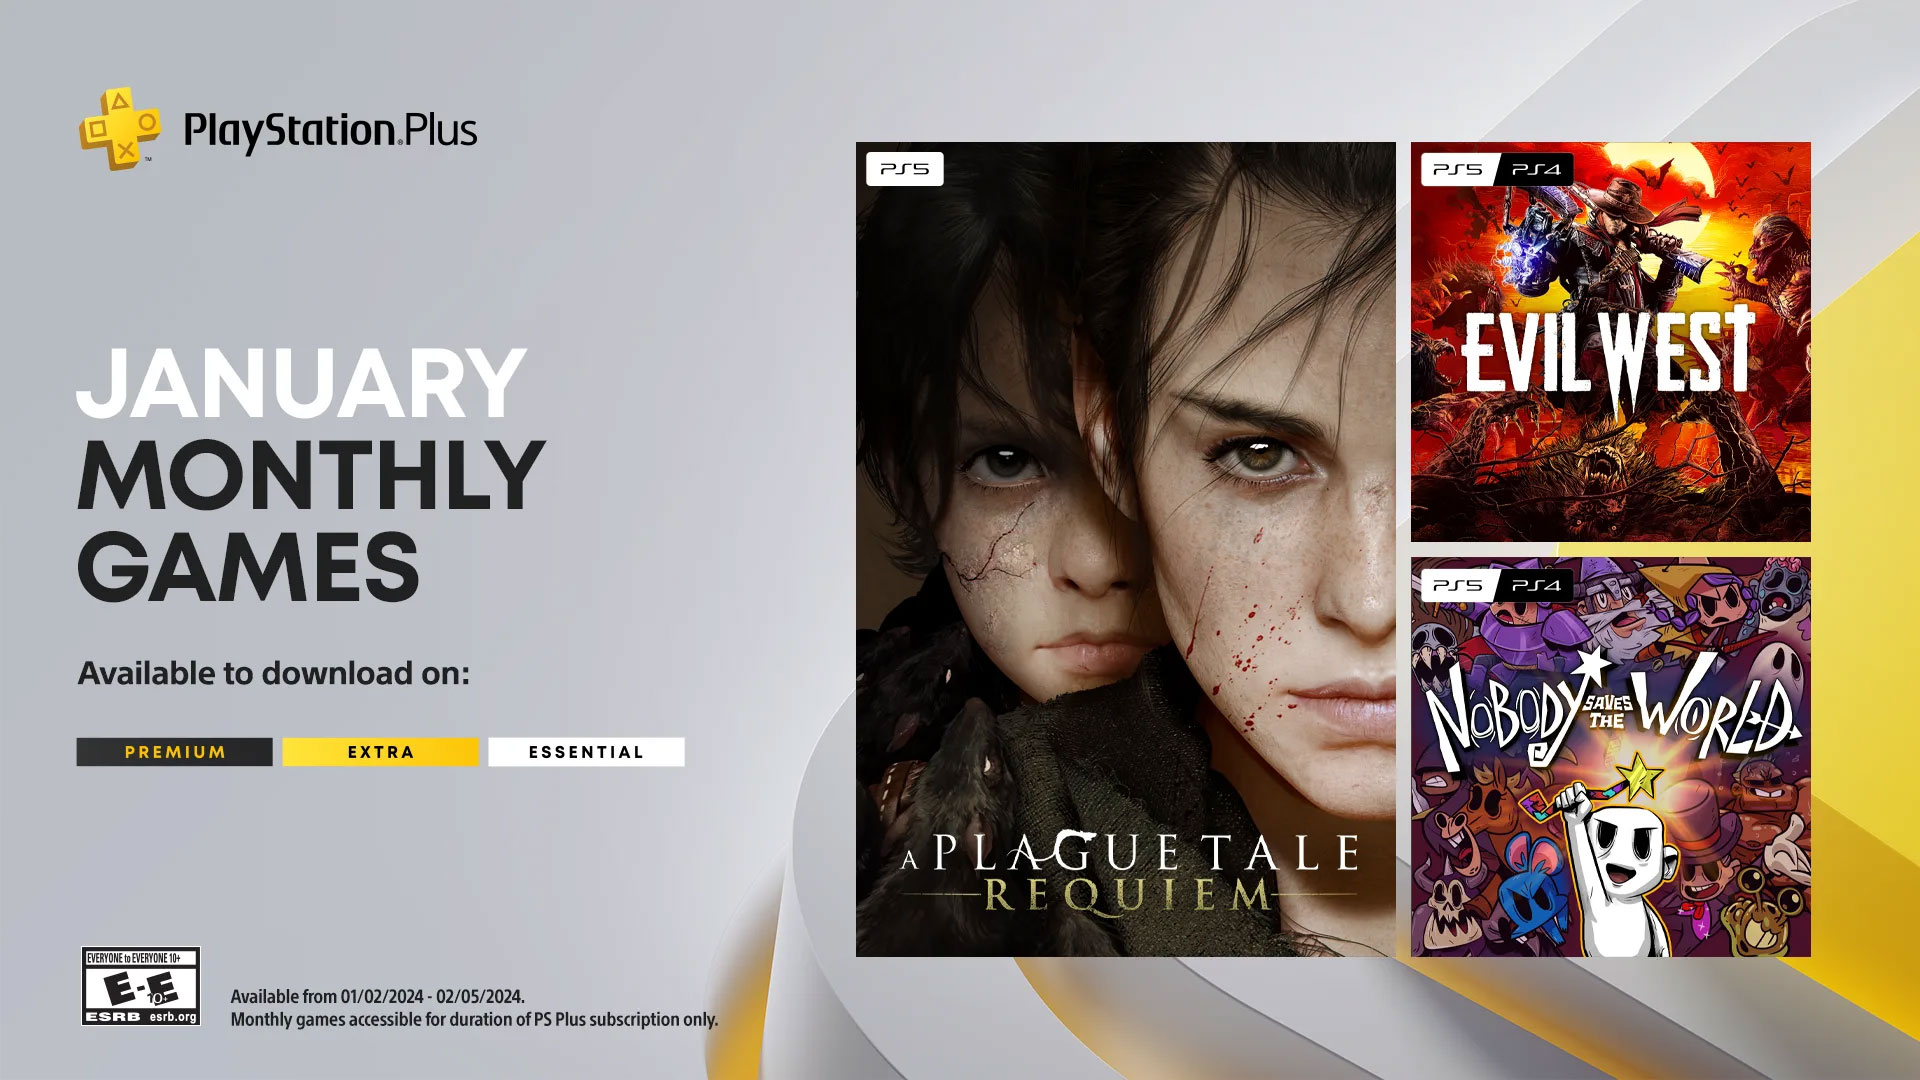 The PlayStation Plus Monthly Games for January include A Plague Tale: Requiem, Evil West, and Nobody Saves the World